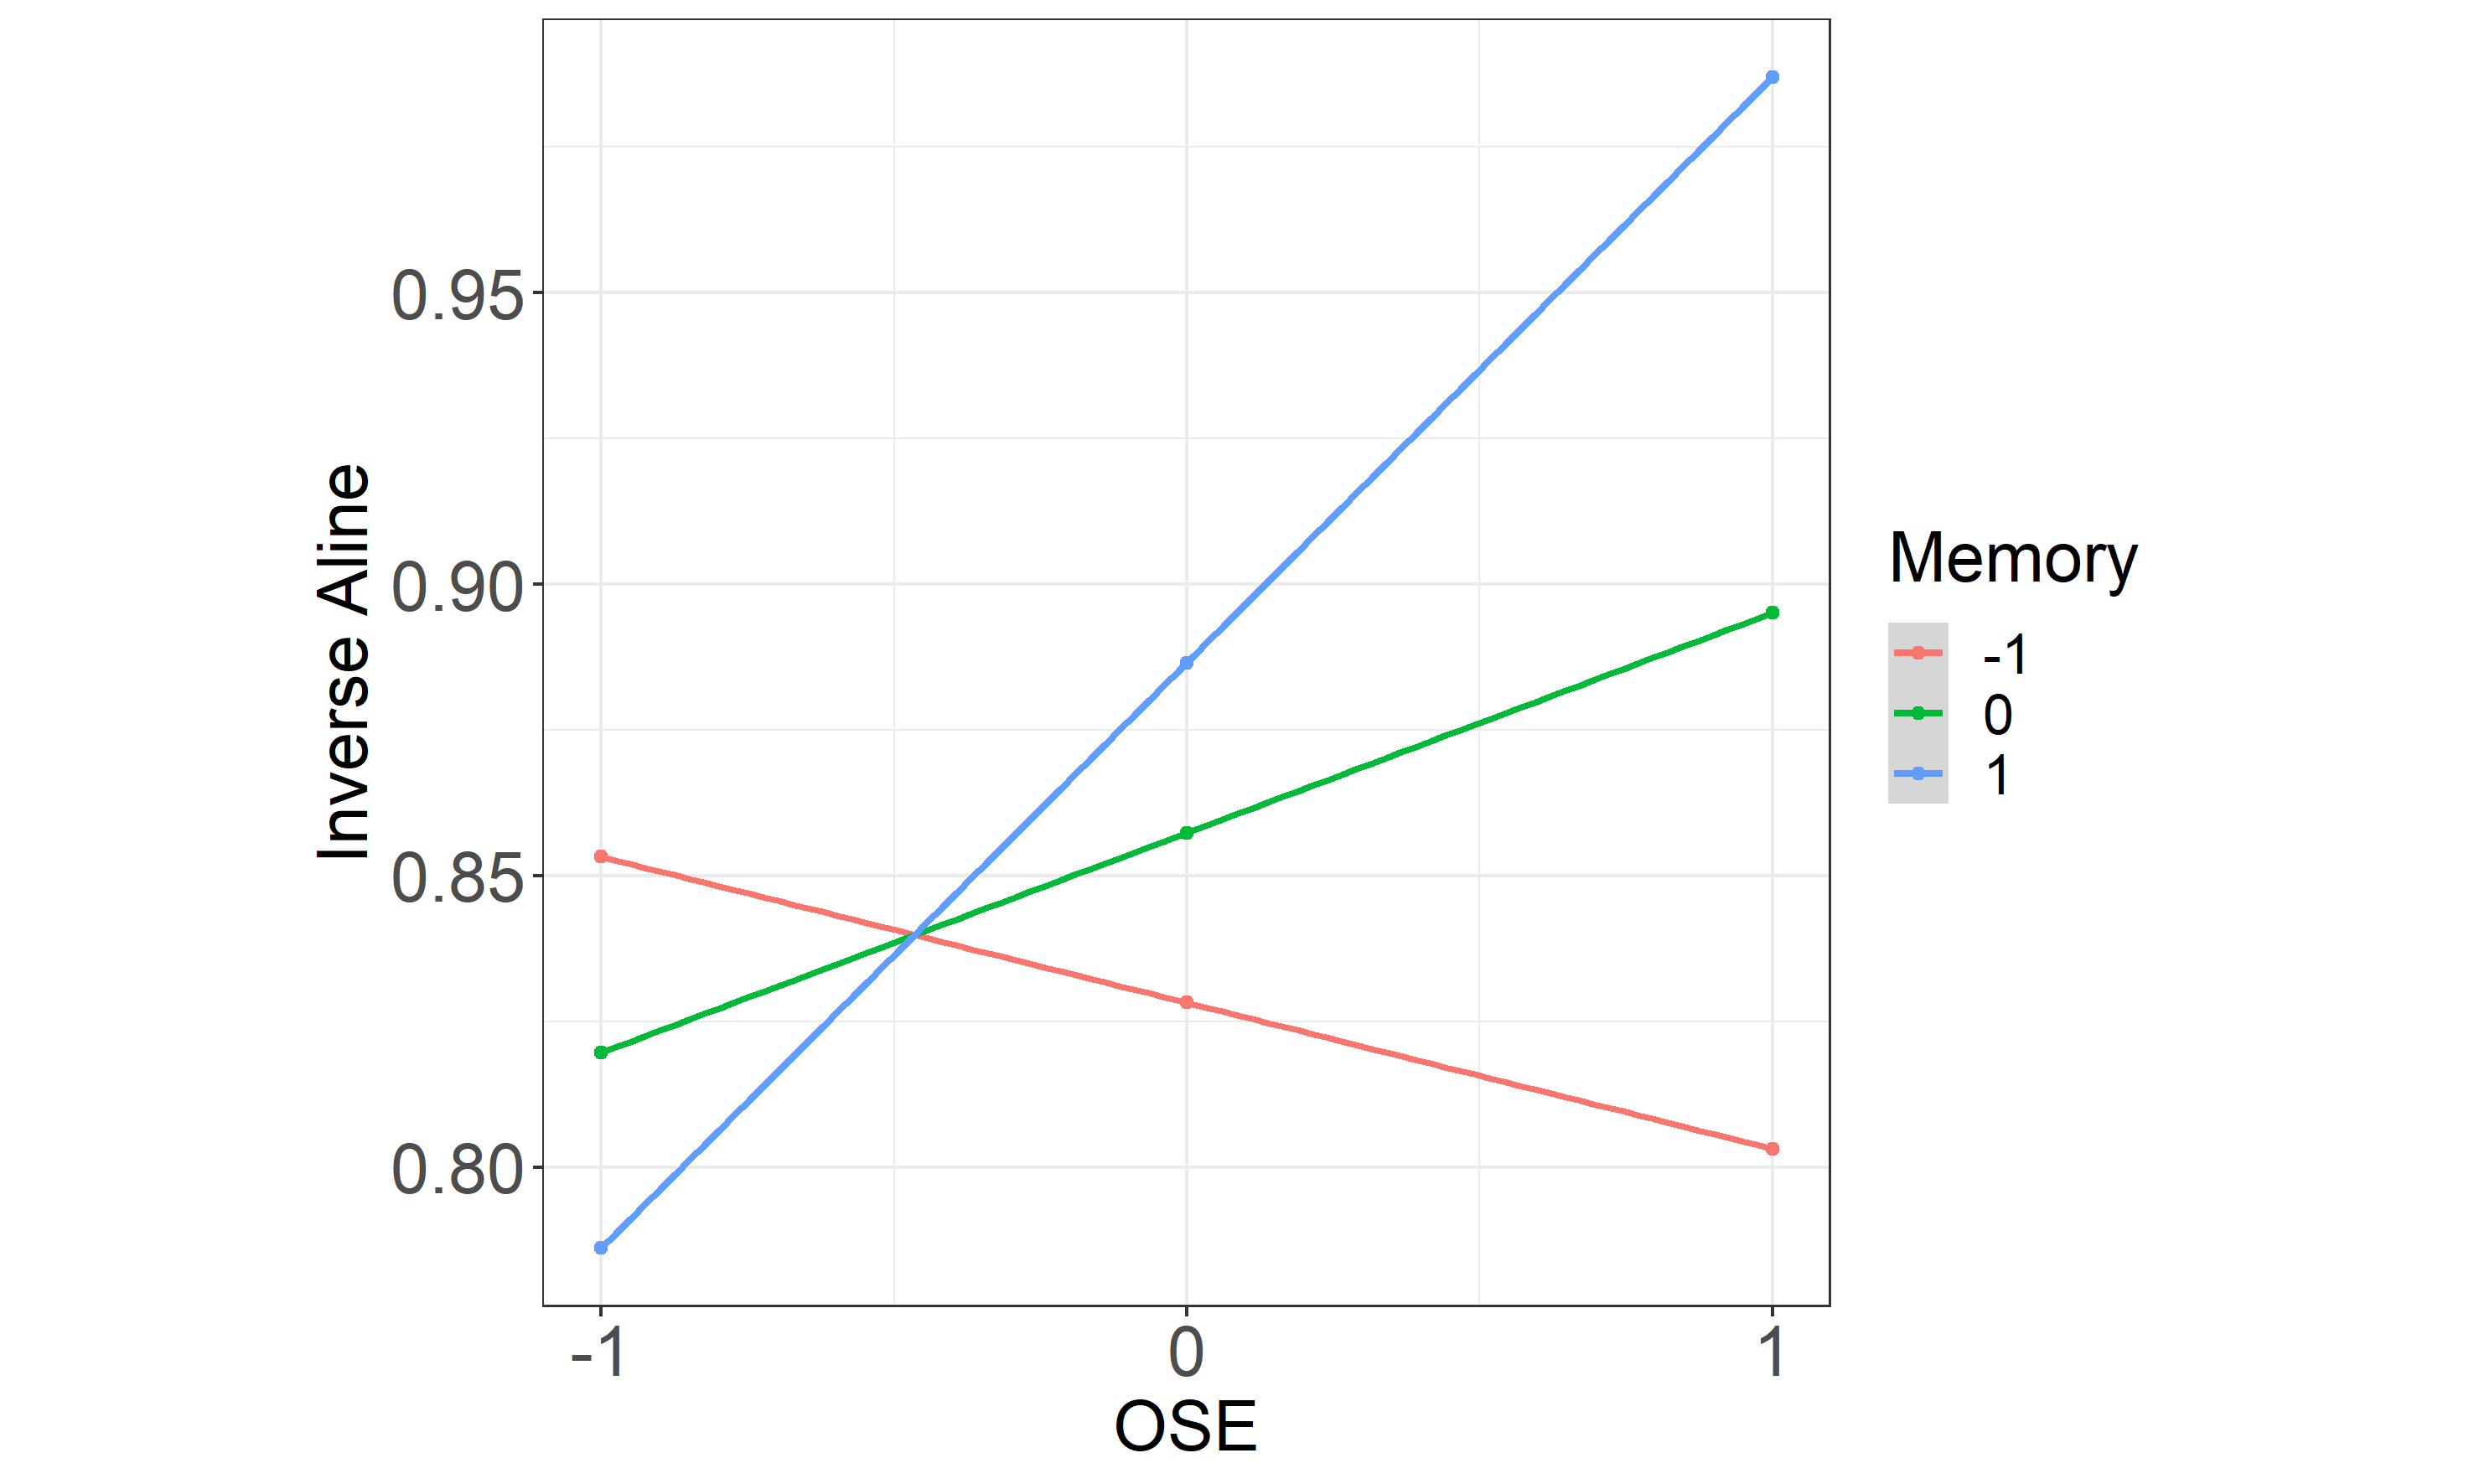 Interaction between PSTM and OSE. The moderating effect of the OSE on the relation between phonological short-term memory and word retention (Inverse ALINE similarity score). Both predictors (PSTM and OSE) are represented as z-scores.